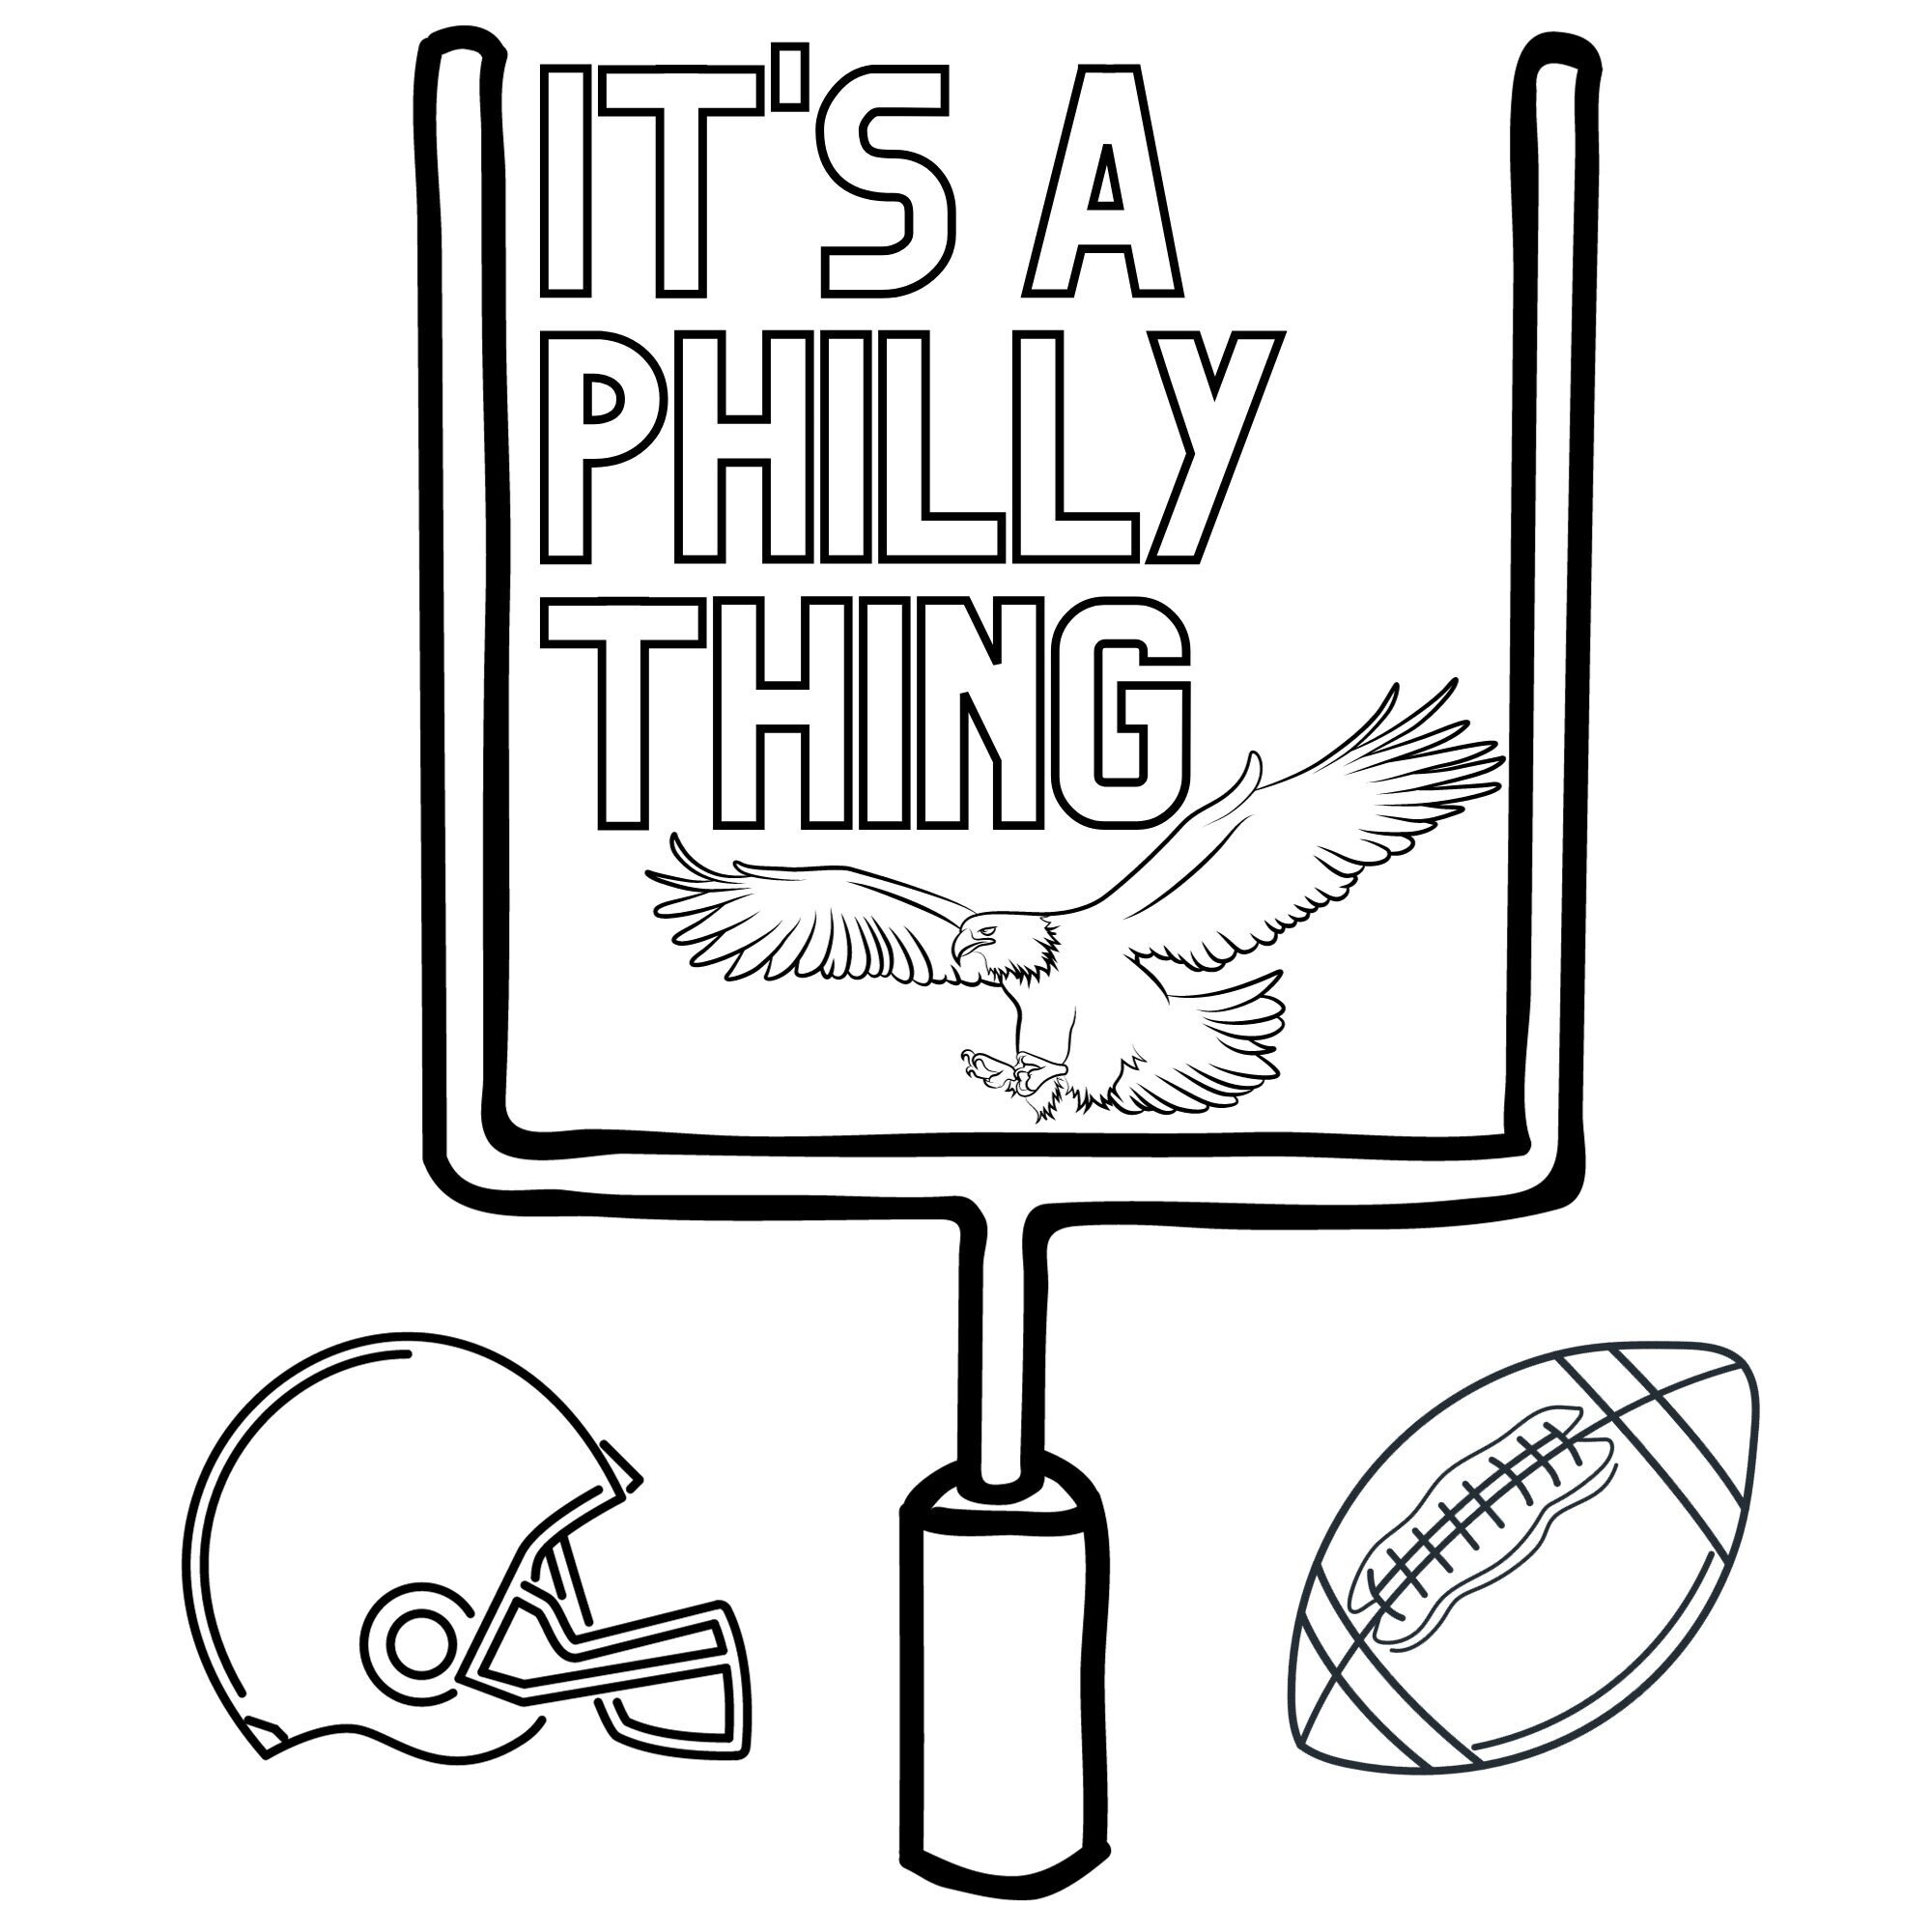 Its a philly thing kids printable coloring page instant download